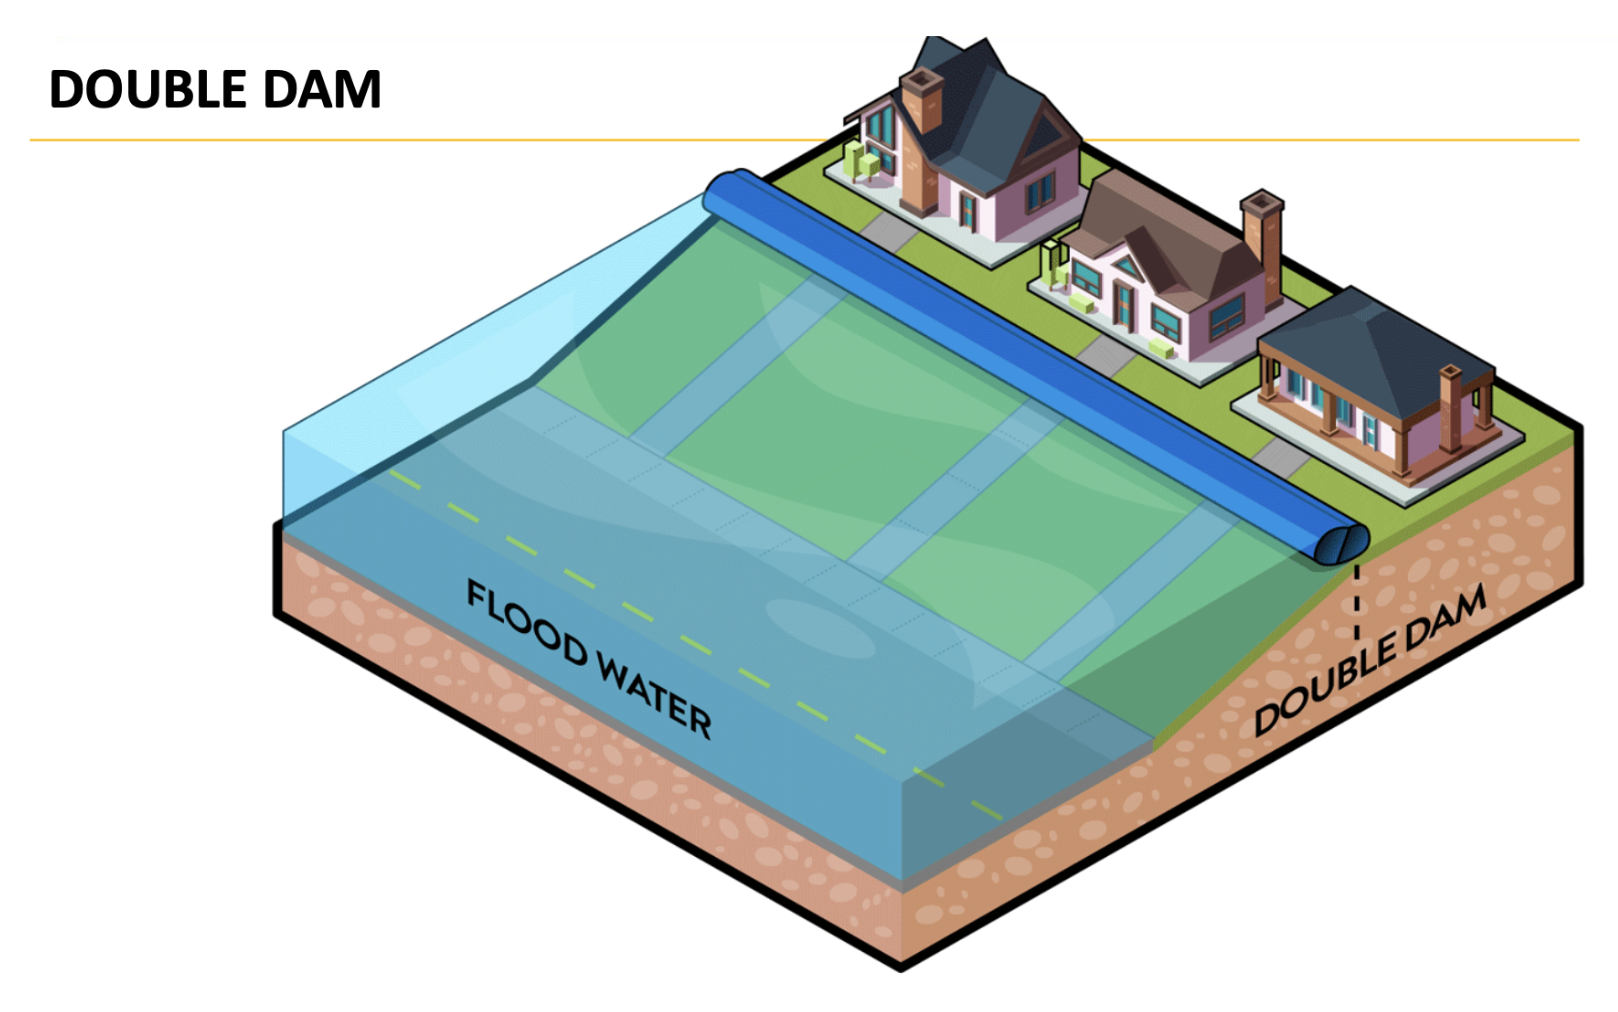 Diagram showing how the Double Dam works